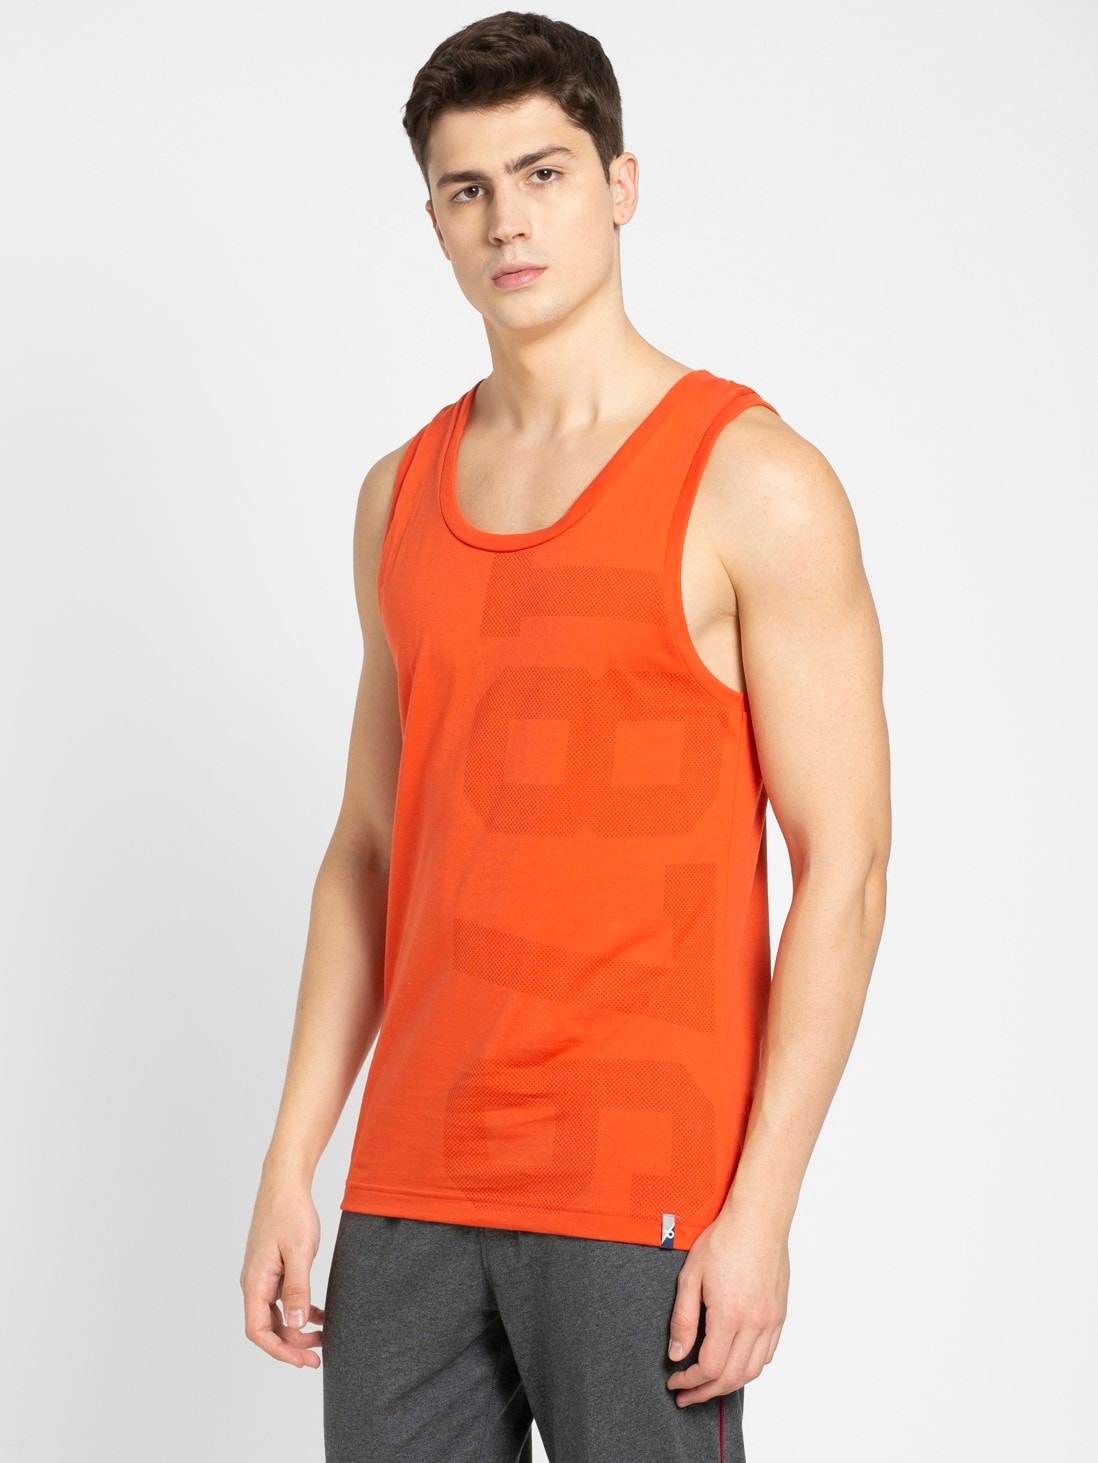 Men's Tank Tops Fashion Gradient Sleeveless T-Shirt Sports Fitness Casual Vests Pullover Bottoming Shirts Tops 